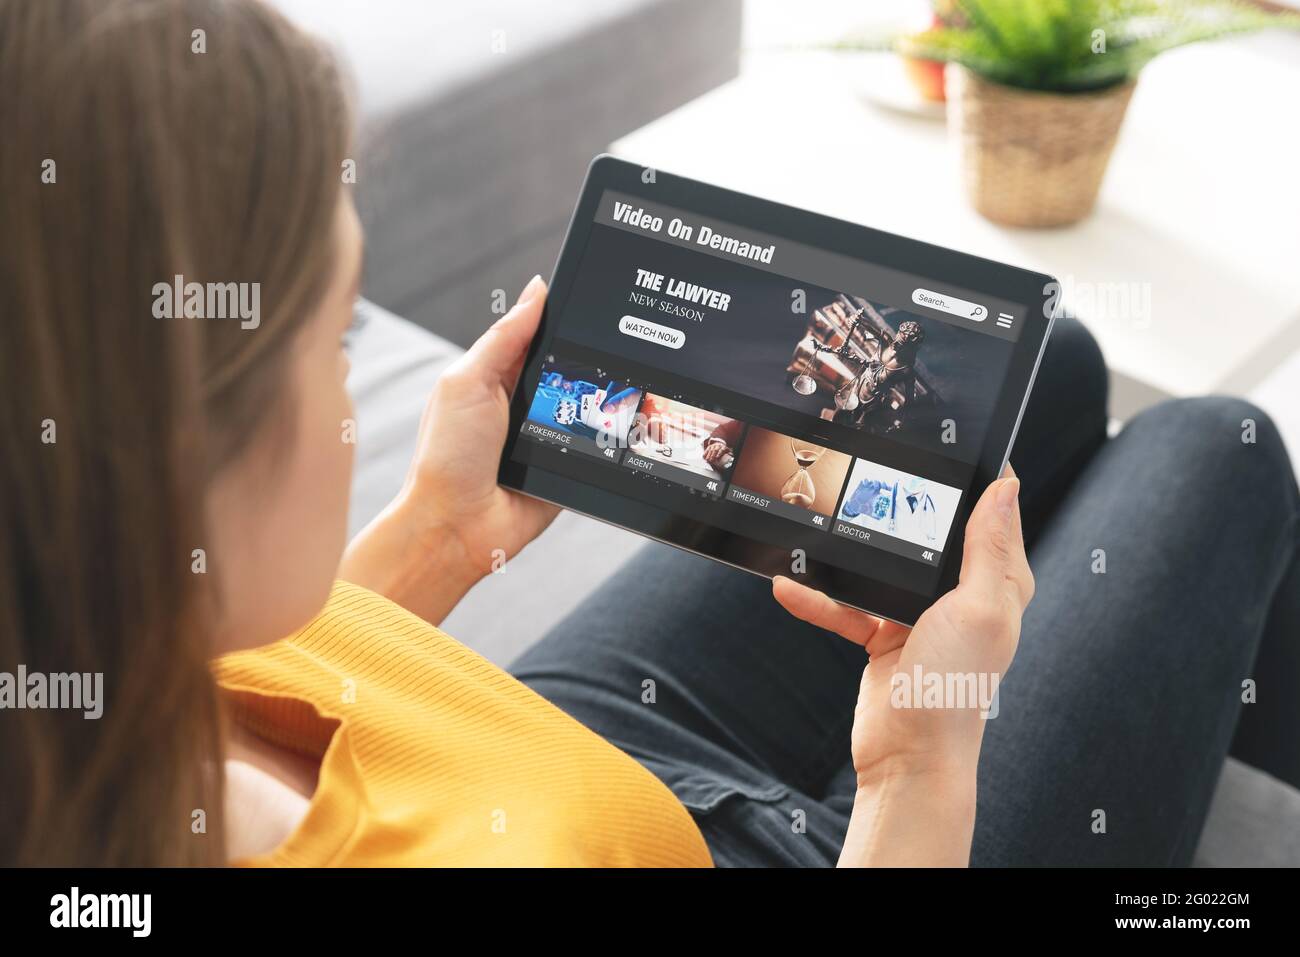 Video on demand, movie streaming, woman with tablet using video service Stock Photo